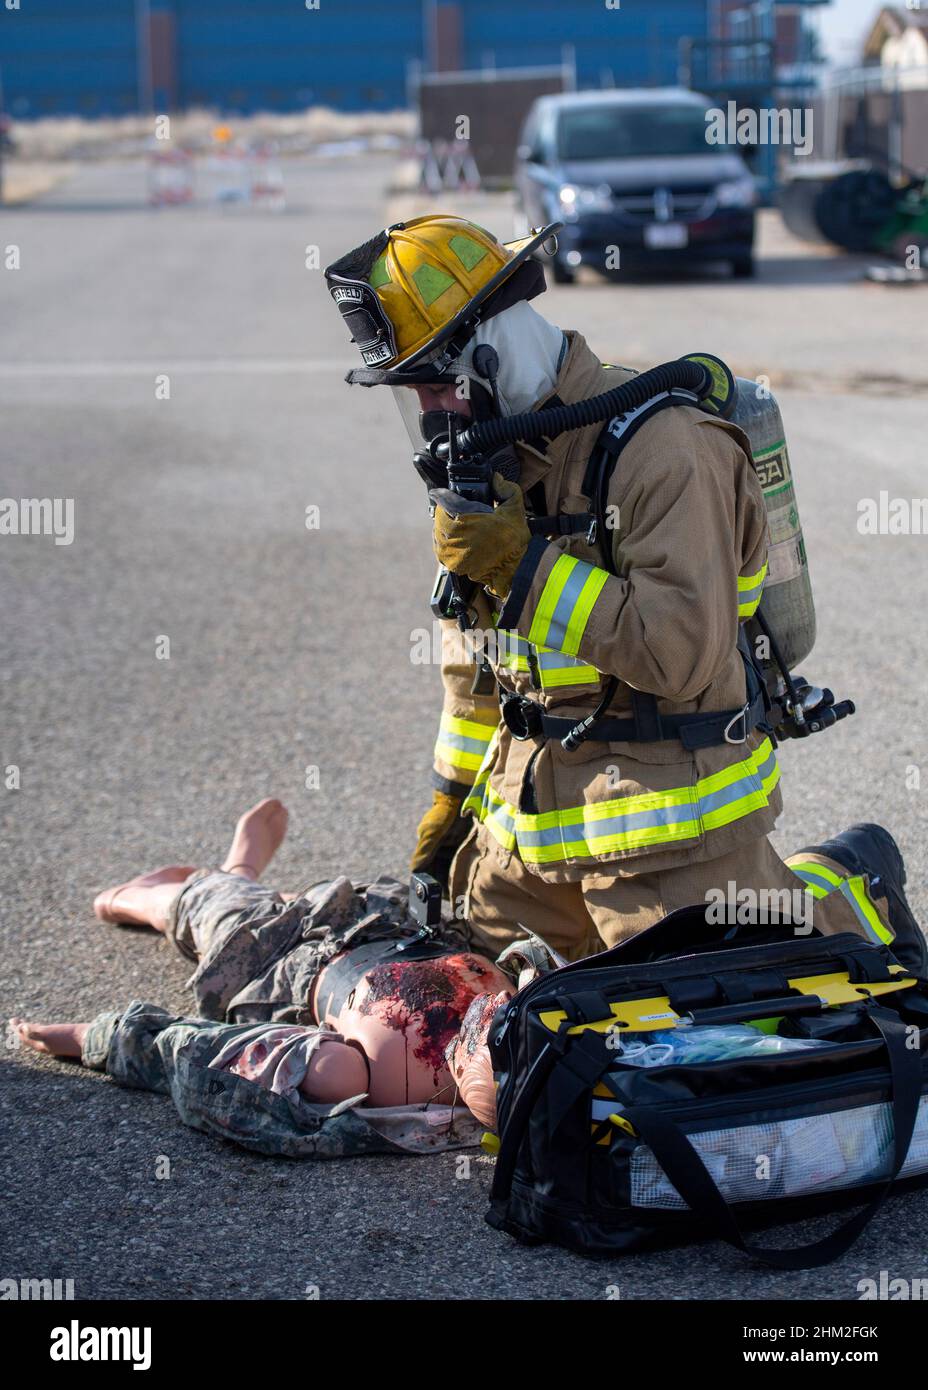 Members of the 124th Logistics Readiness Squadron, Gowen Fire Department, respond to a simulated fire with simulated casualties while participating in a wing focus exercise at Gowen Field in Boise, ID, Feb. 4-6, 2022. The WFE consisted of multiple scenarios where members were met with different alarms requiring them to test their MOPP gear and respond to attacks. (U.S. Air National Guard photo by Capt. Bonnie Blakely) Stock Photo